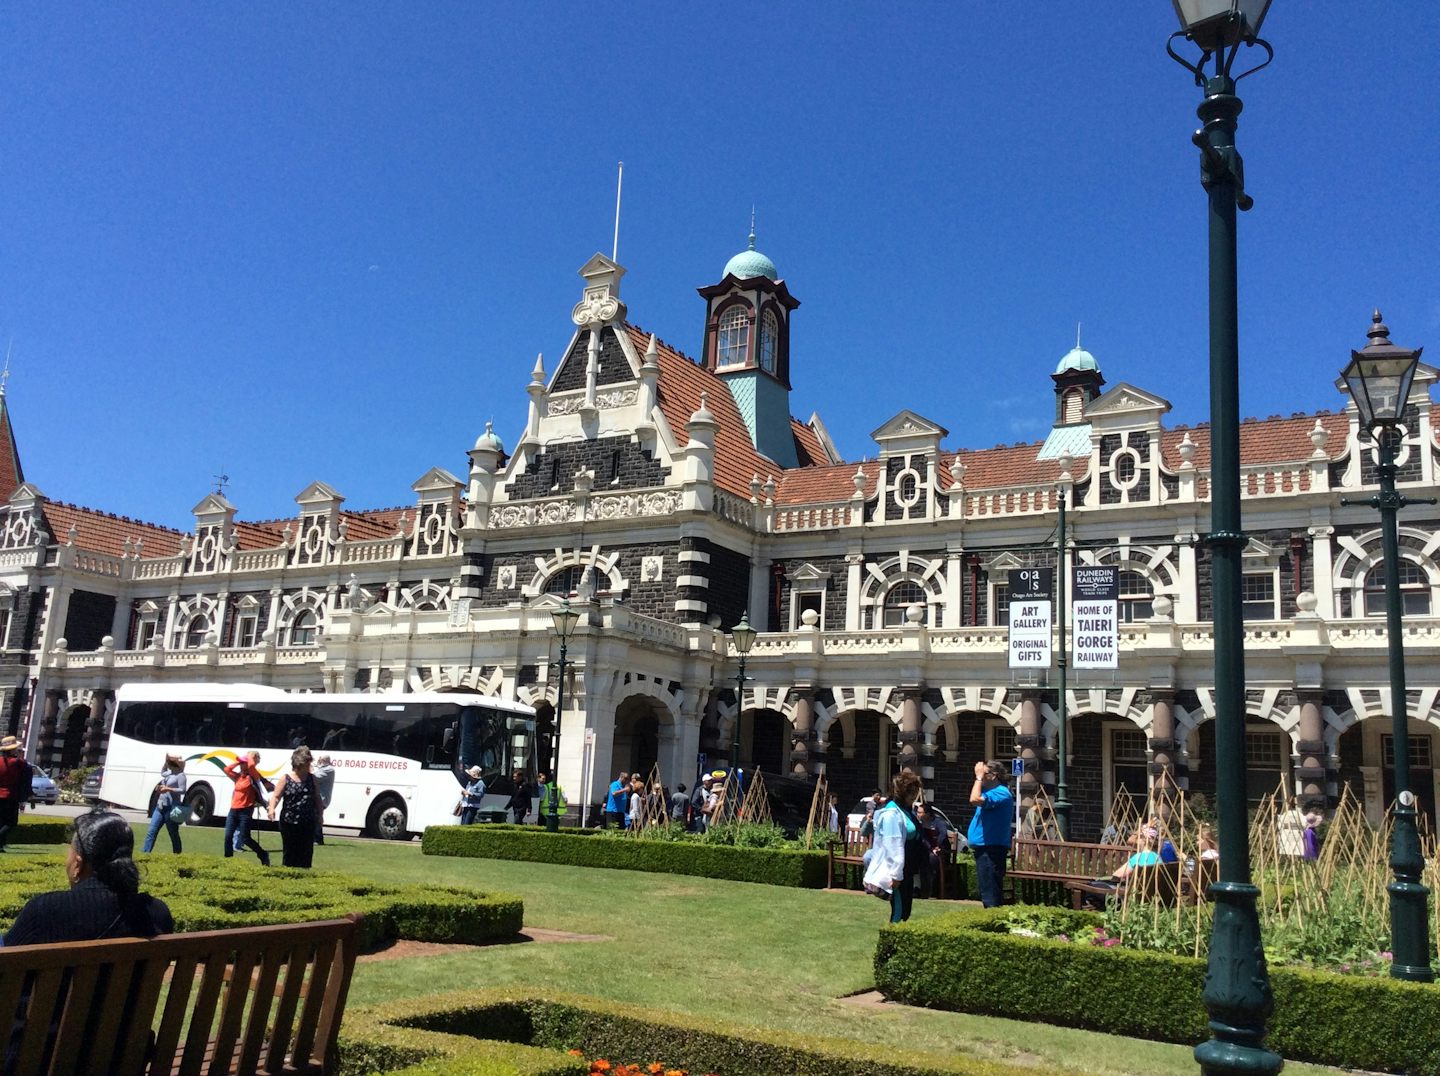 Dunedin Rsilway station, took train to famous Gorge, long trip